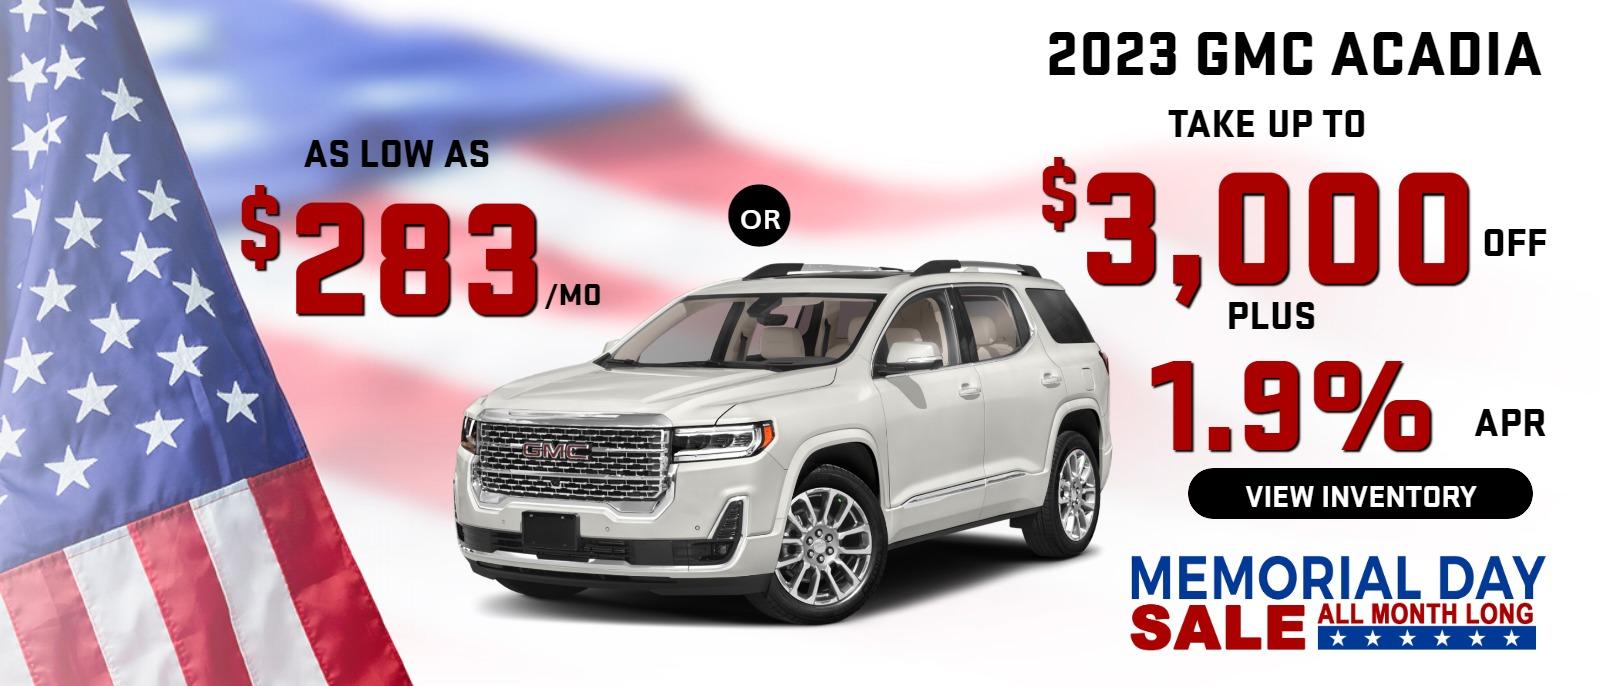 2023 GMC Acadia
Stock G6065

take up to $3000 OFF
OR 
$283/mo
& 
1.9% finance